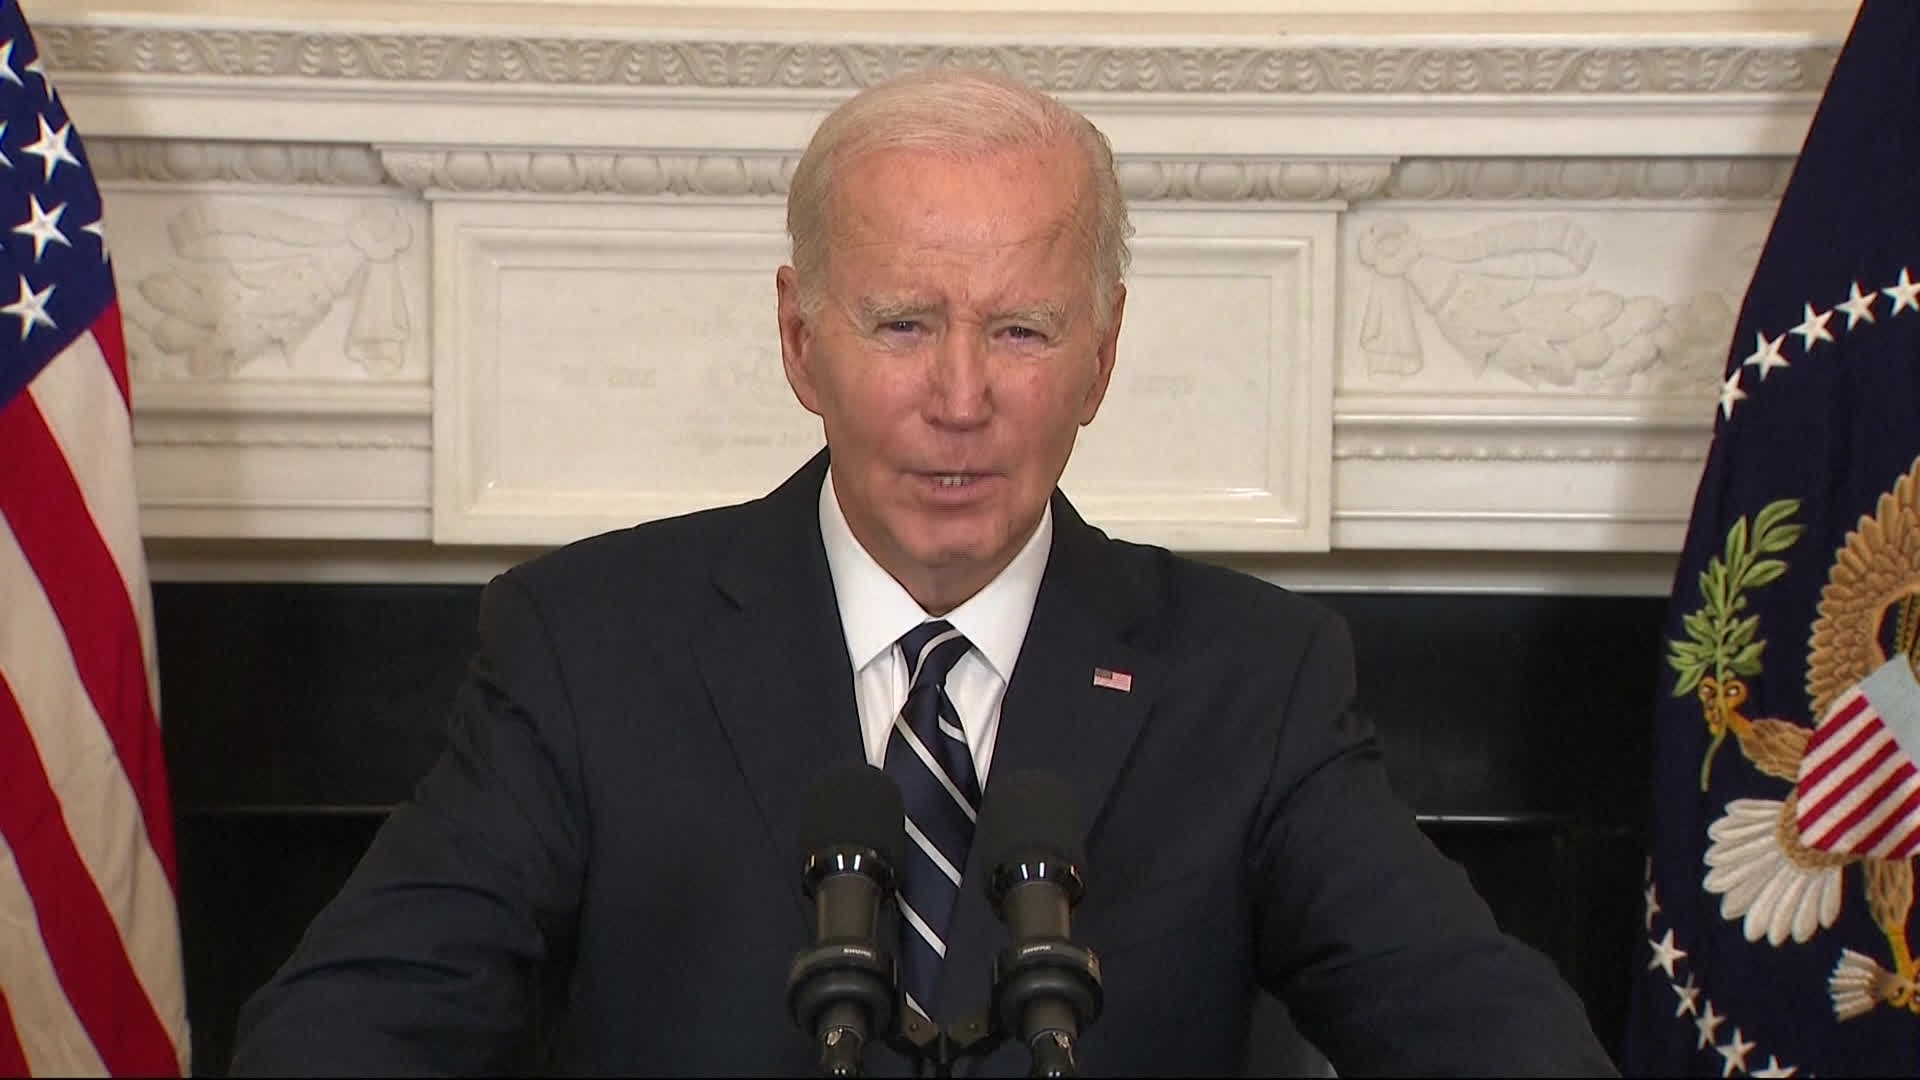 Watch Biden: The US Stands With Israel